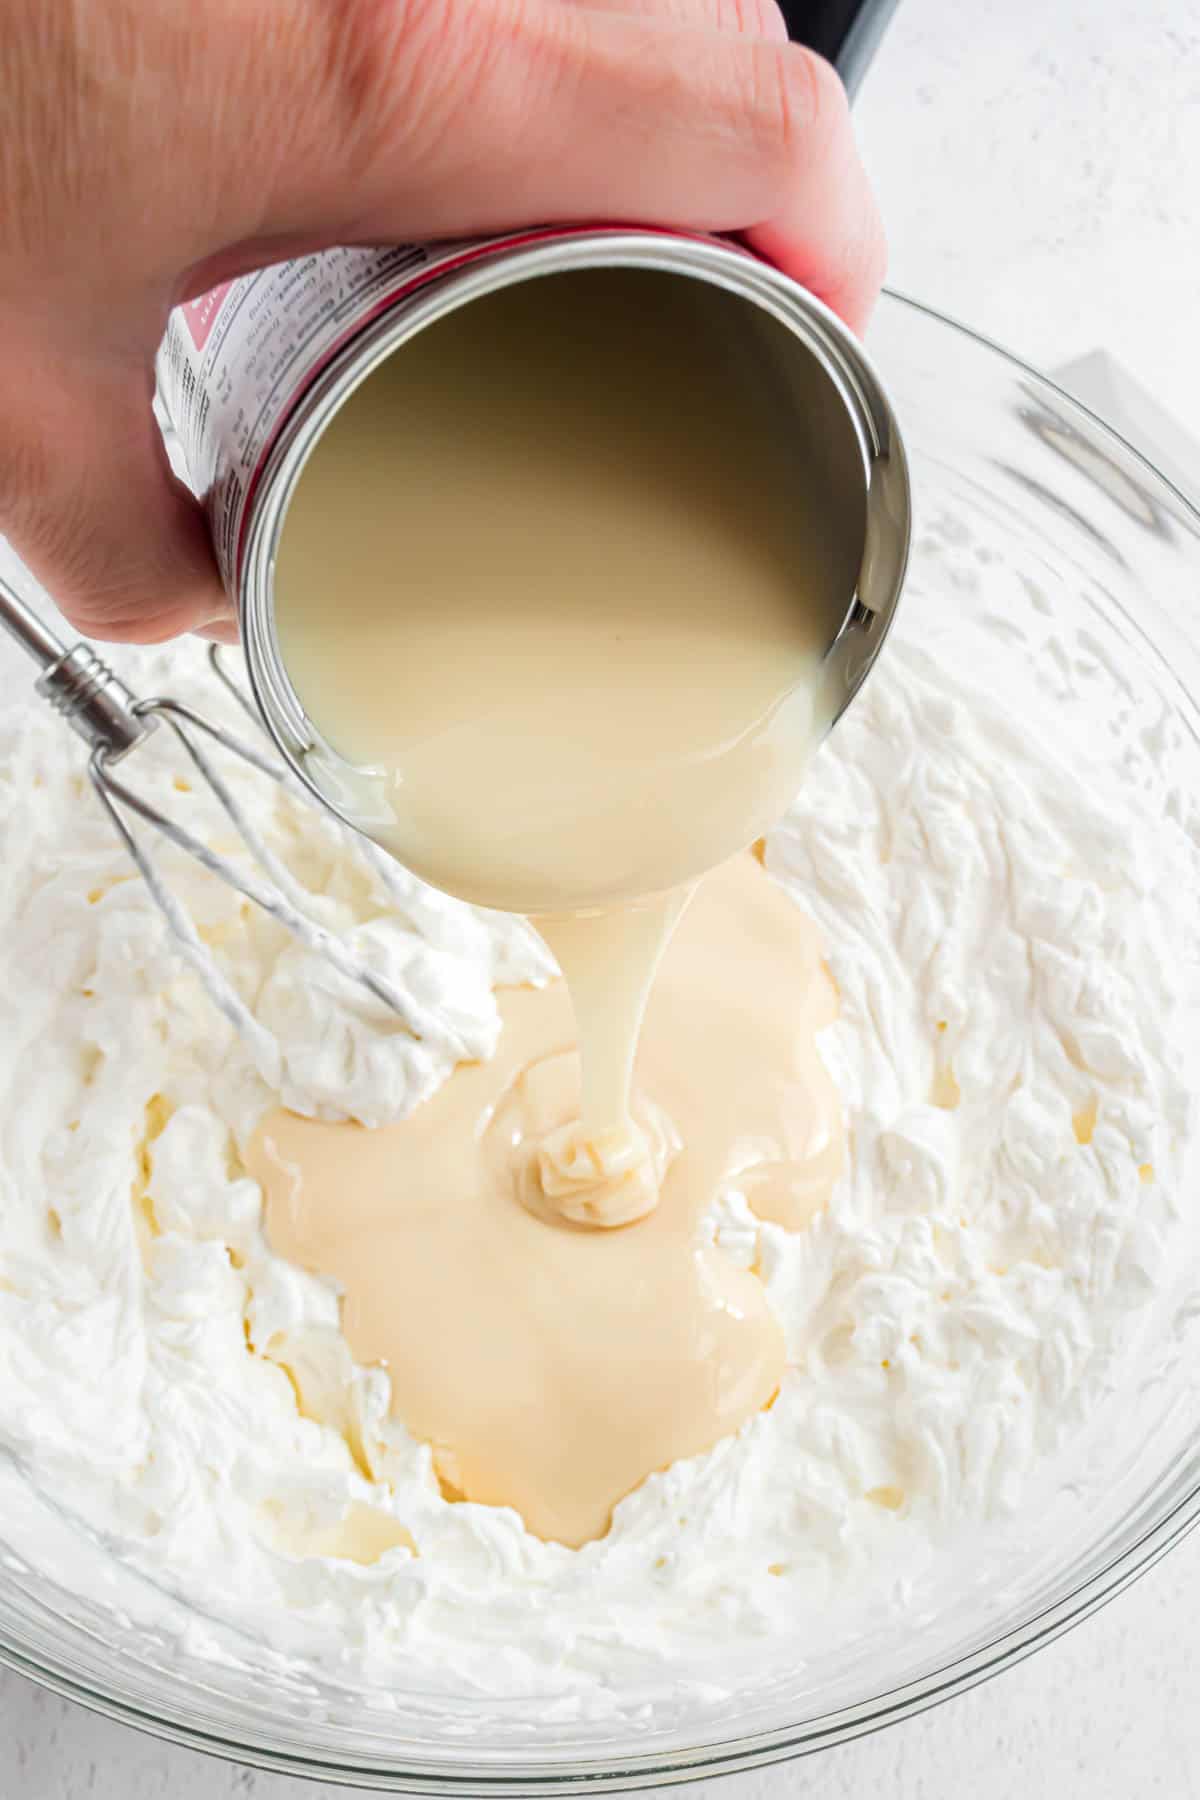 A hand pouring sweetened condensed milk from the can into a bowl of whipped cream.